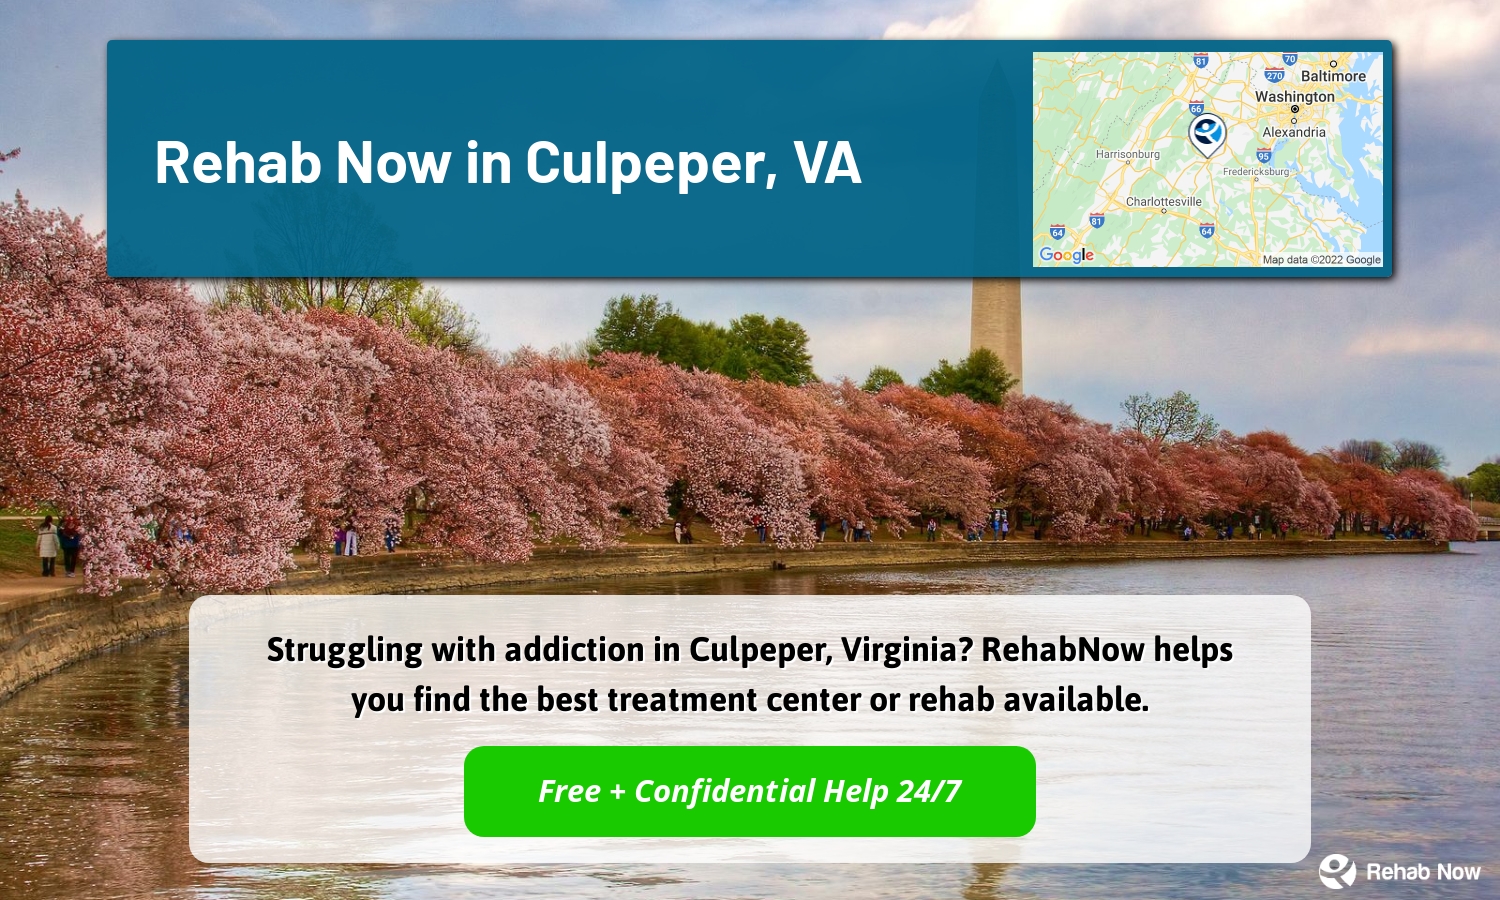 Struggling with addiction in Culpeper, Virginia? RehabNow helps you find the best treatment center or rehab available.